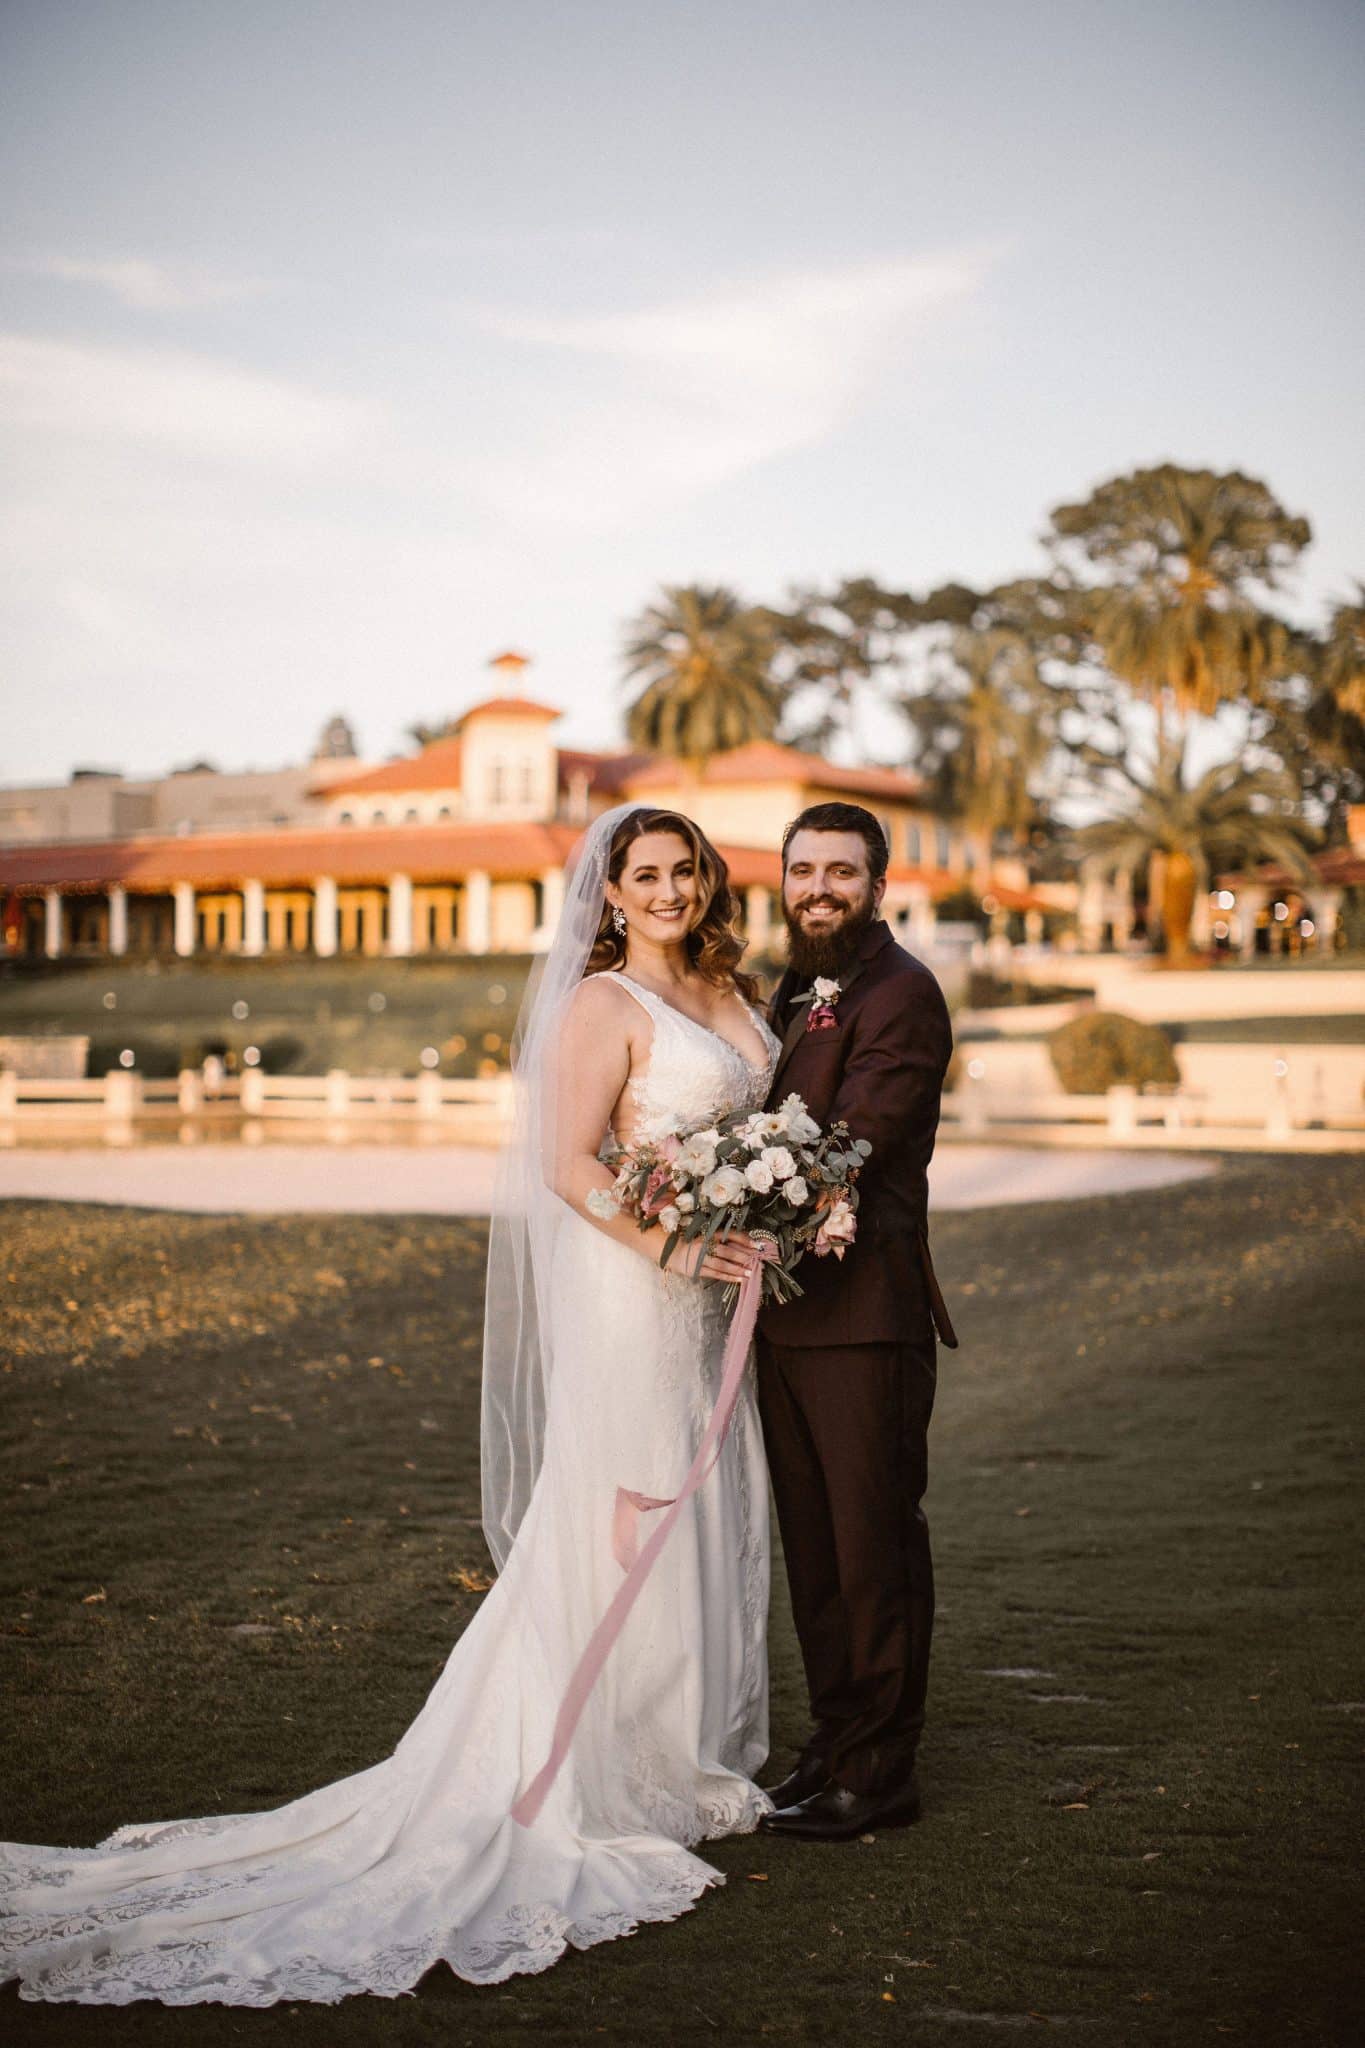 Bride and groom at a Spanish style wedding venue in Florida